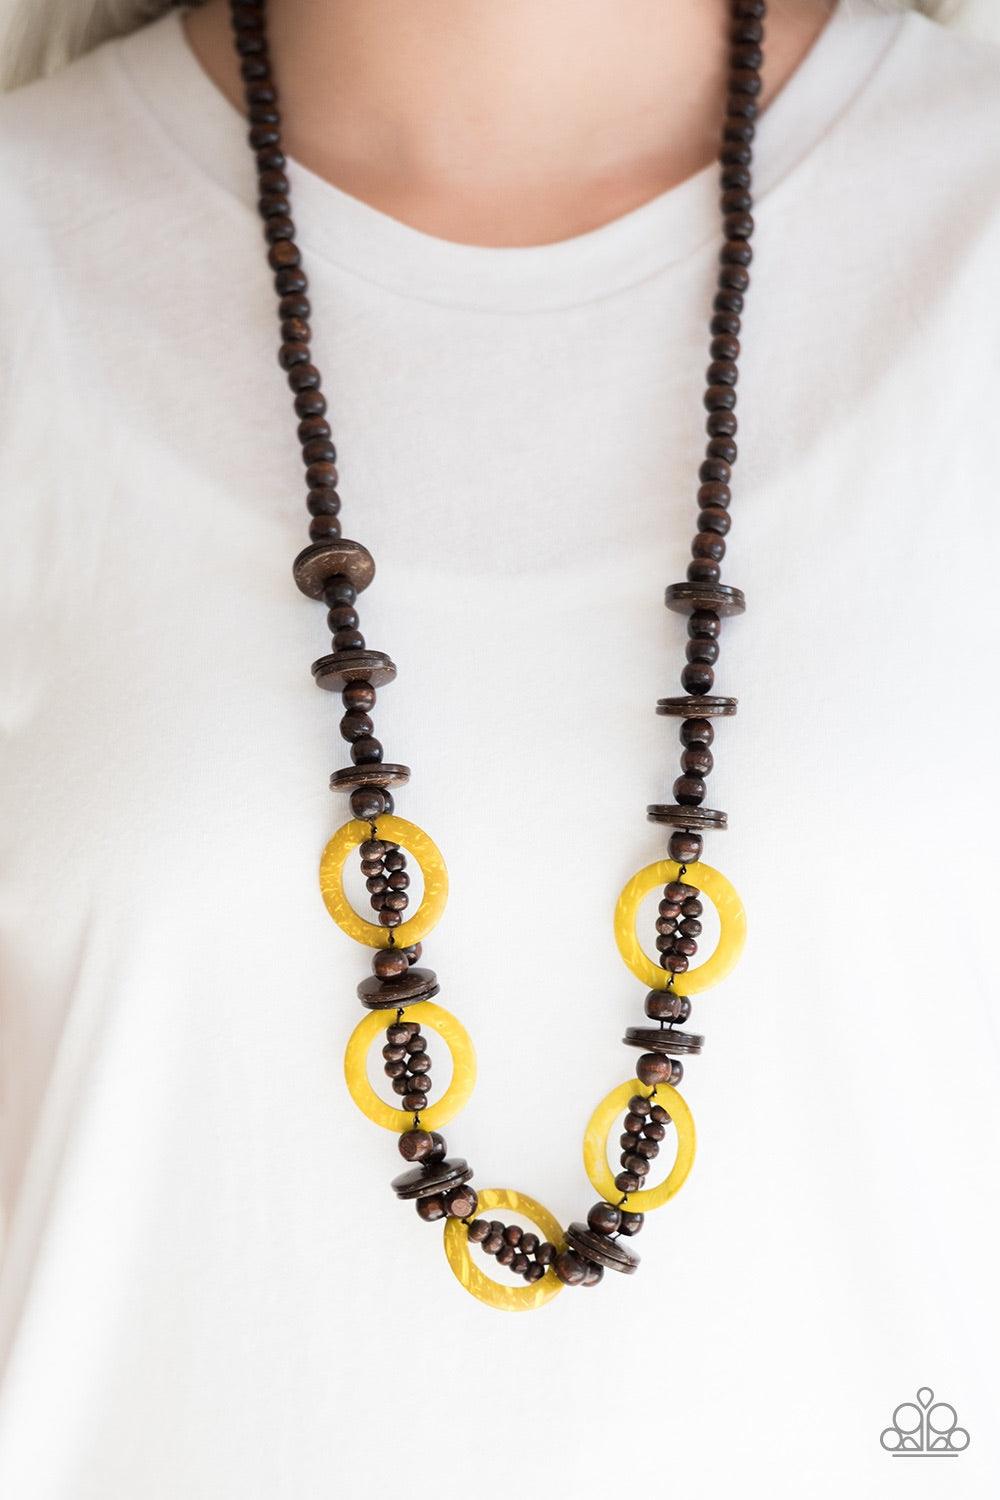 Paparazzi Accessories Fiji Foxtrot - Yellow Mismatched brown wooden beads are threaded along a brown cord for an earthy look. Sunny yellow wooden discs connect with beaded links across the chest for a summery finish. Jewelry